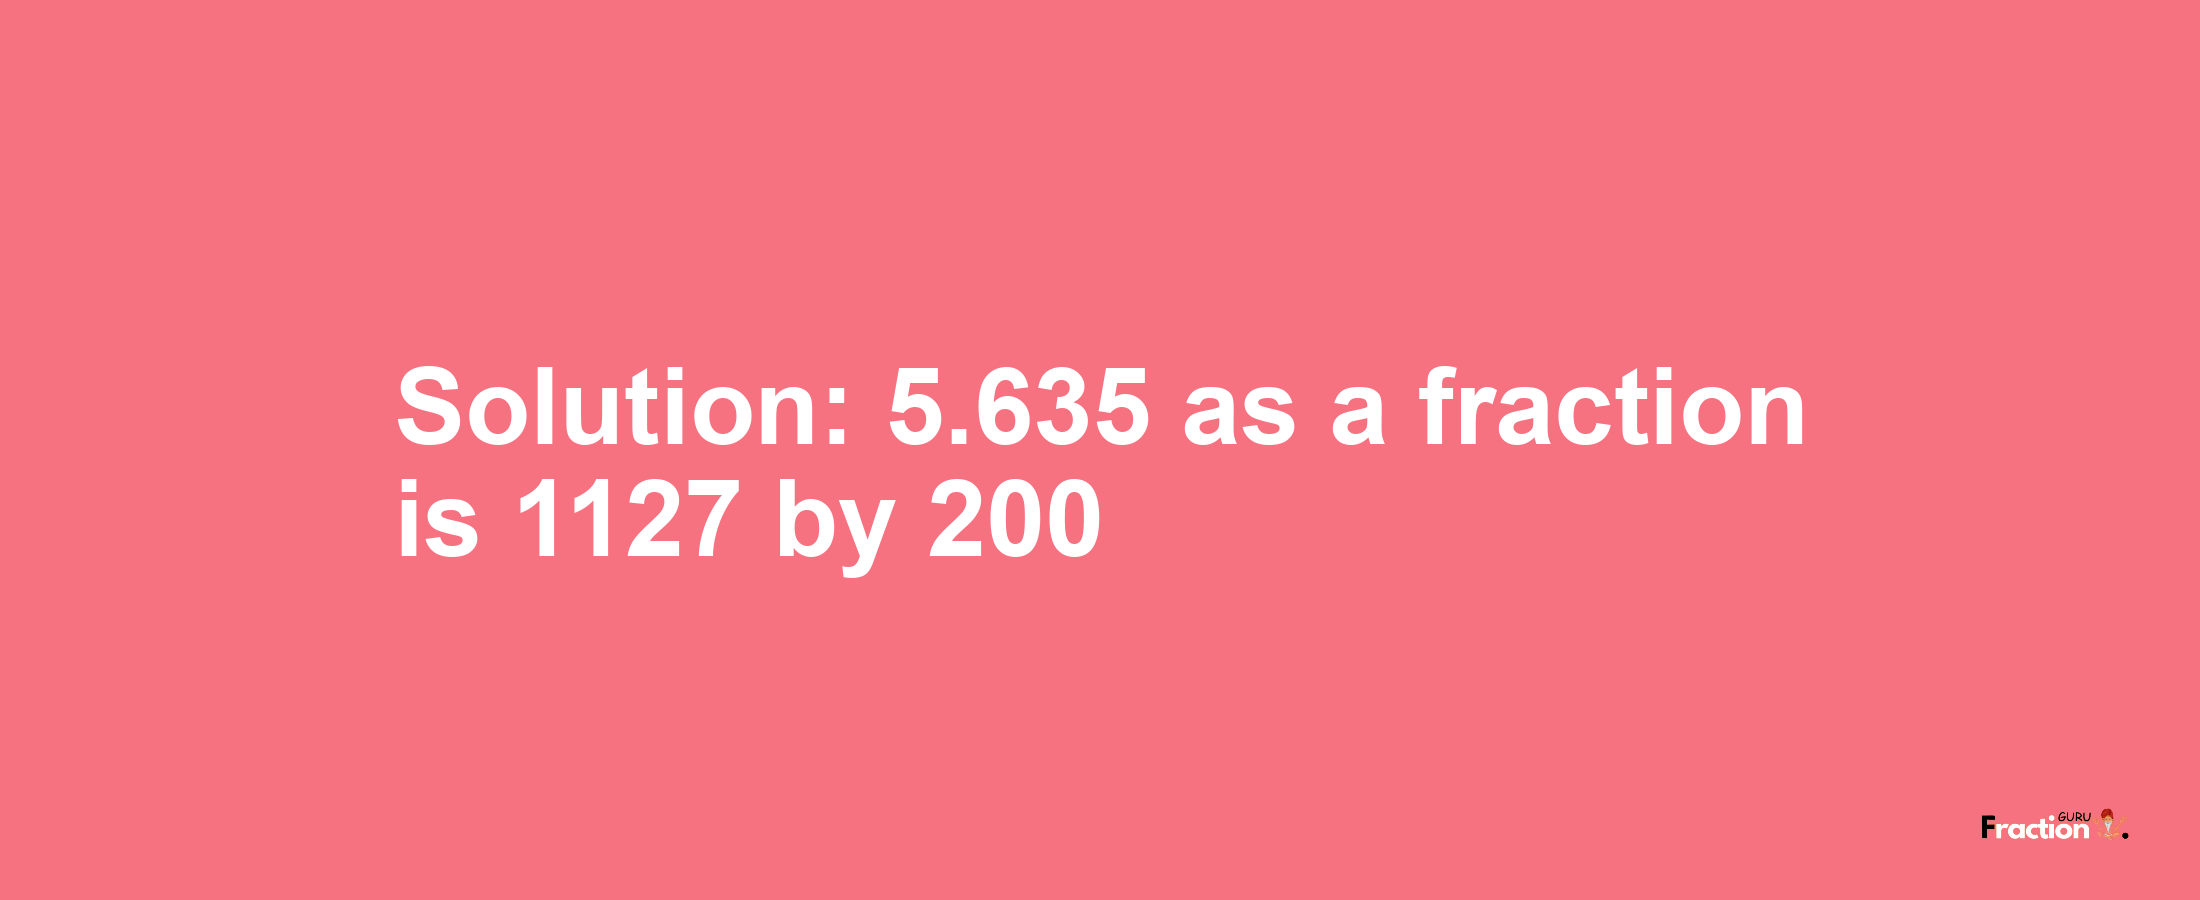 Solution:5.635 as a fraction is 1127/200